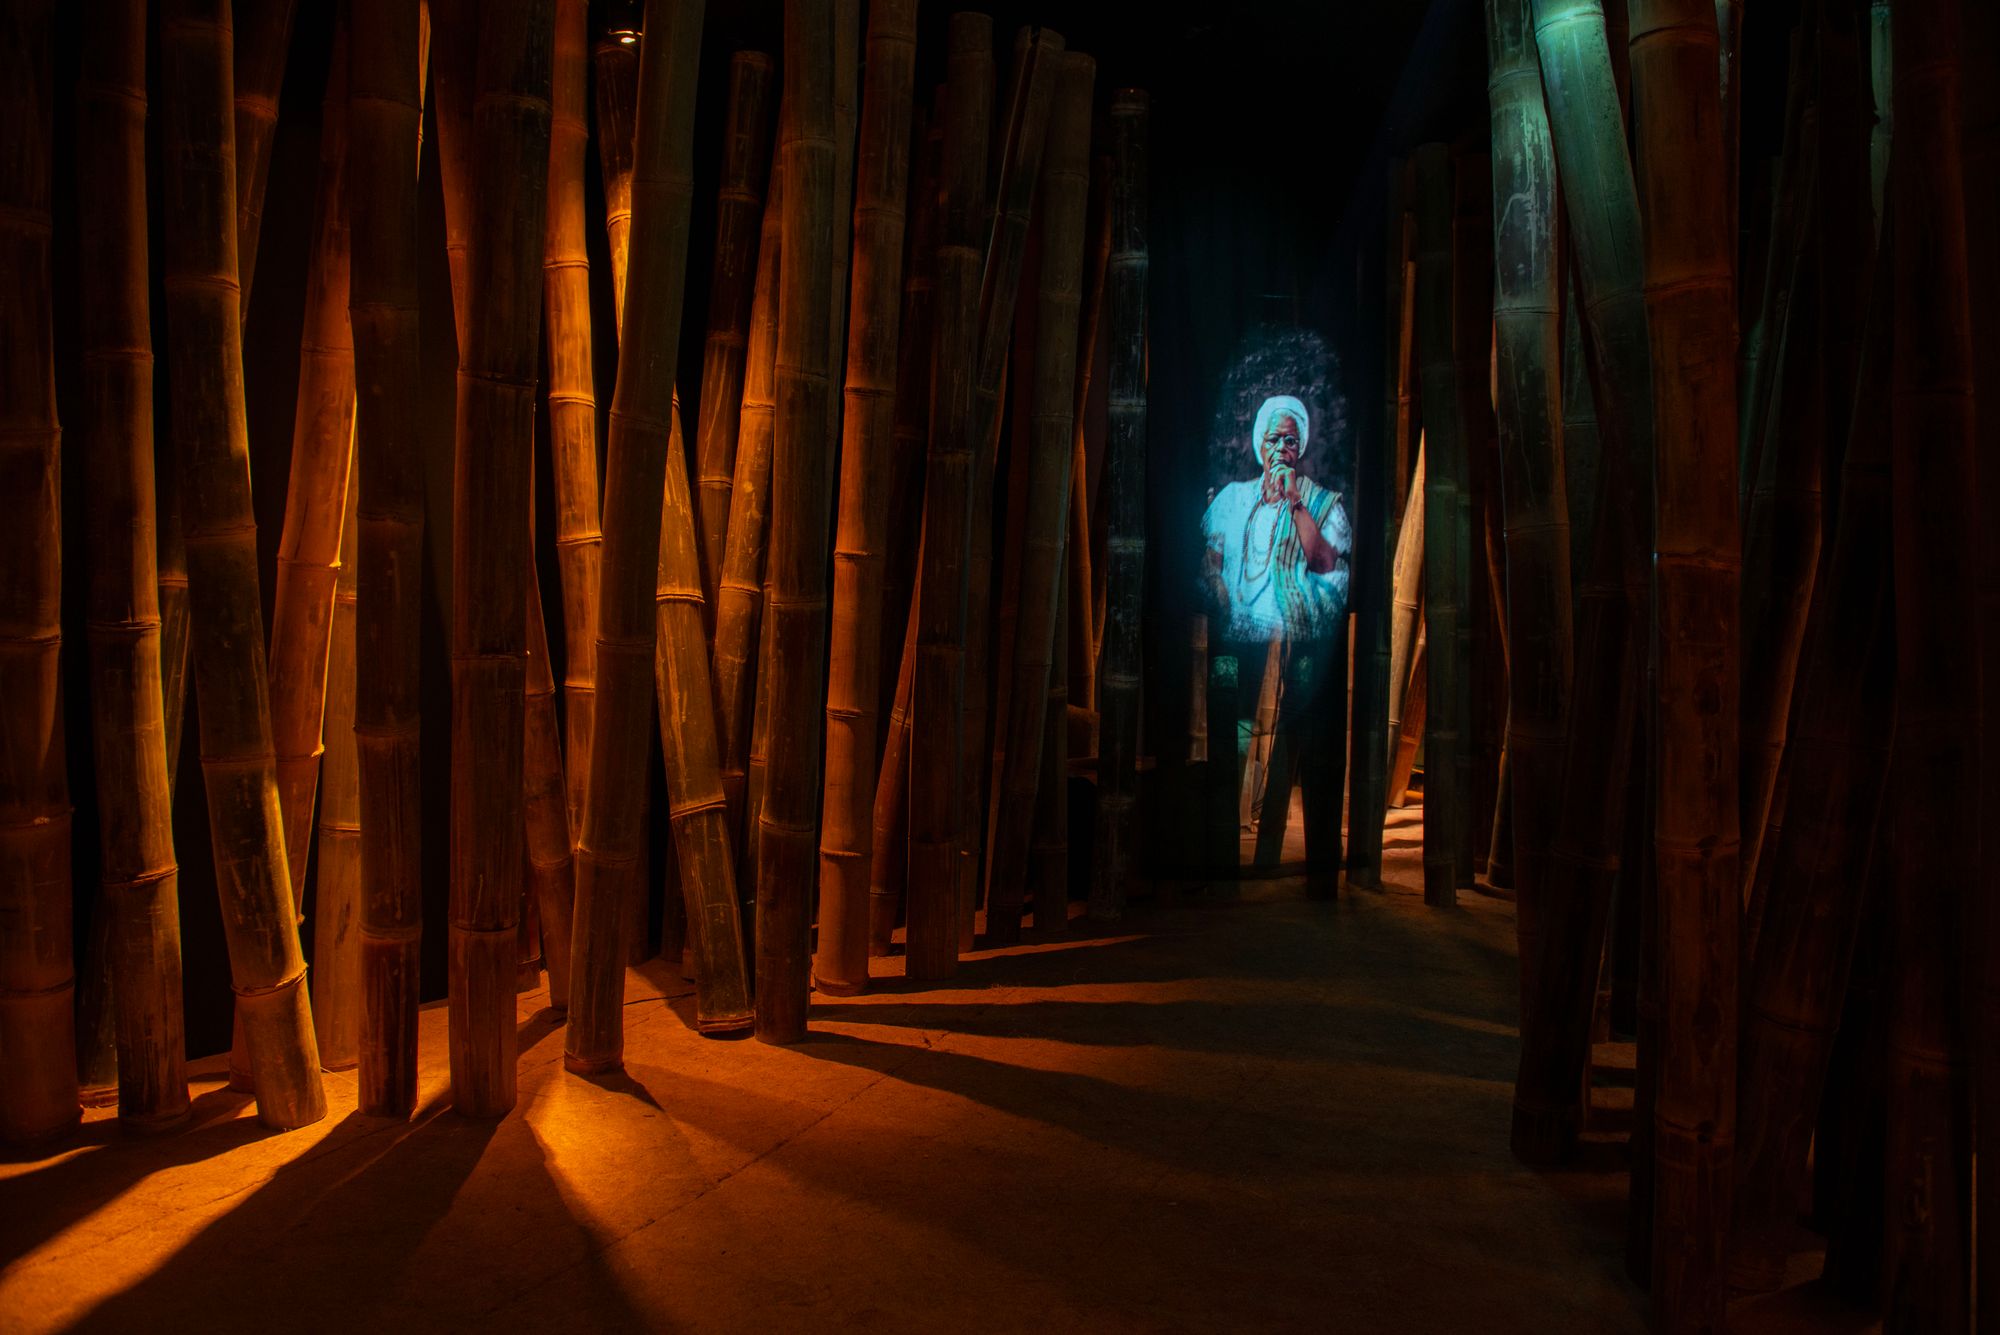 Soft orange light spills out from behind bamboo shoots in a dark room; a screen lights the right side with the image of a black woman bathed in sky blue light.